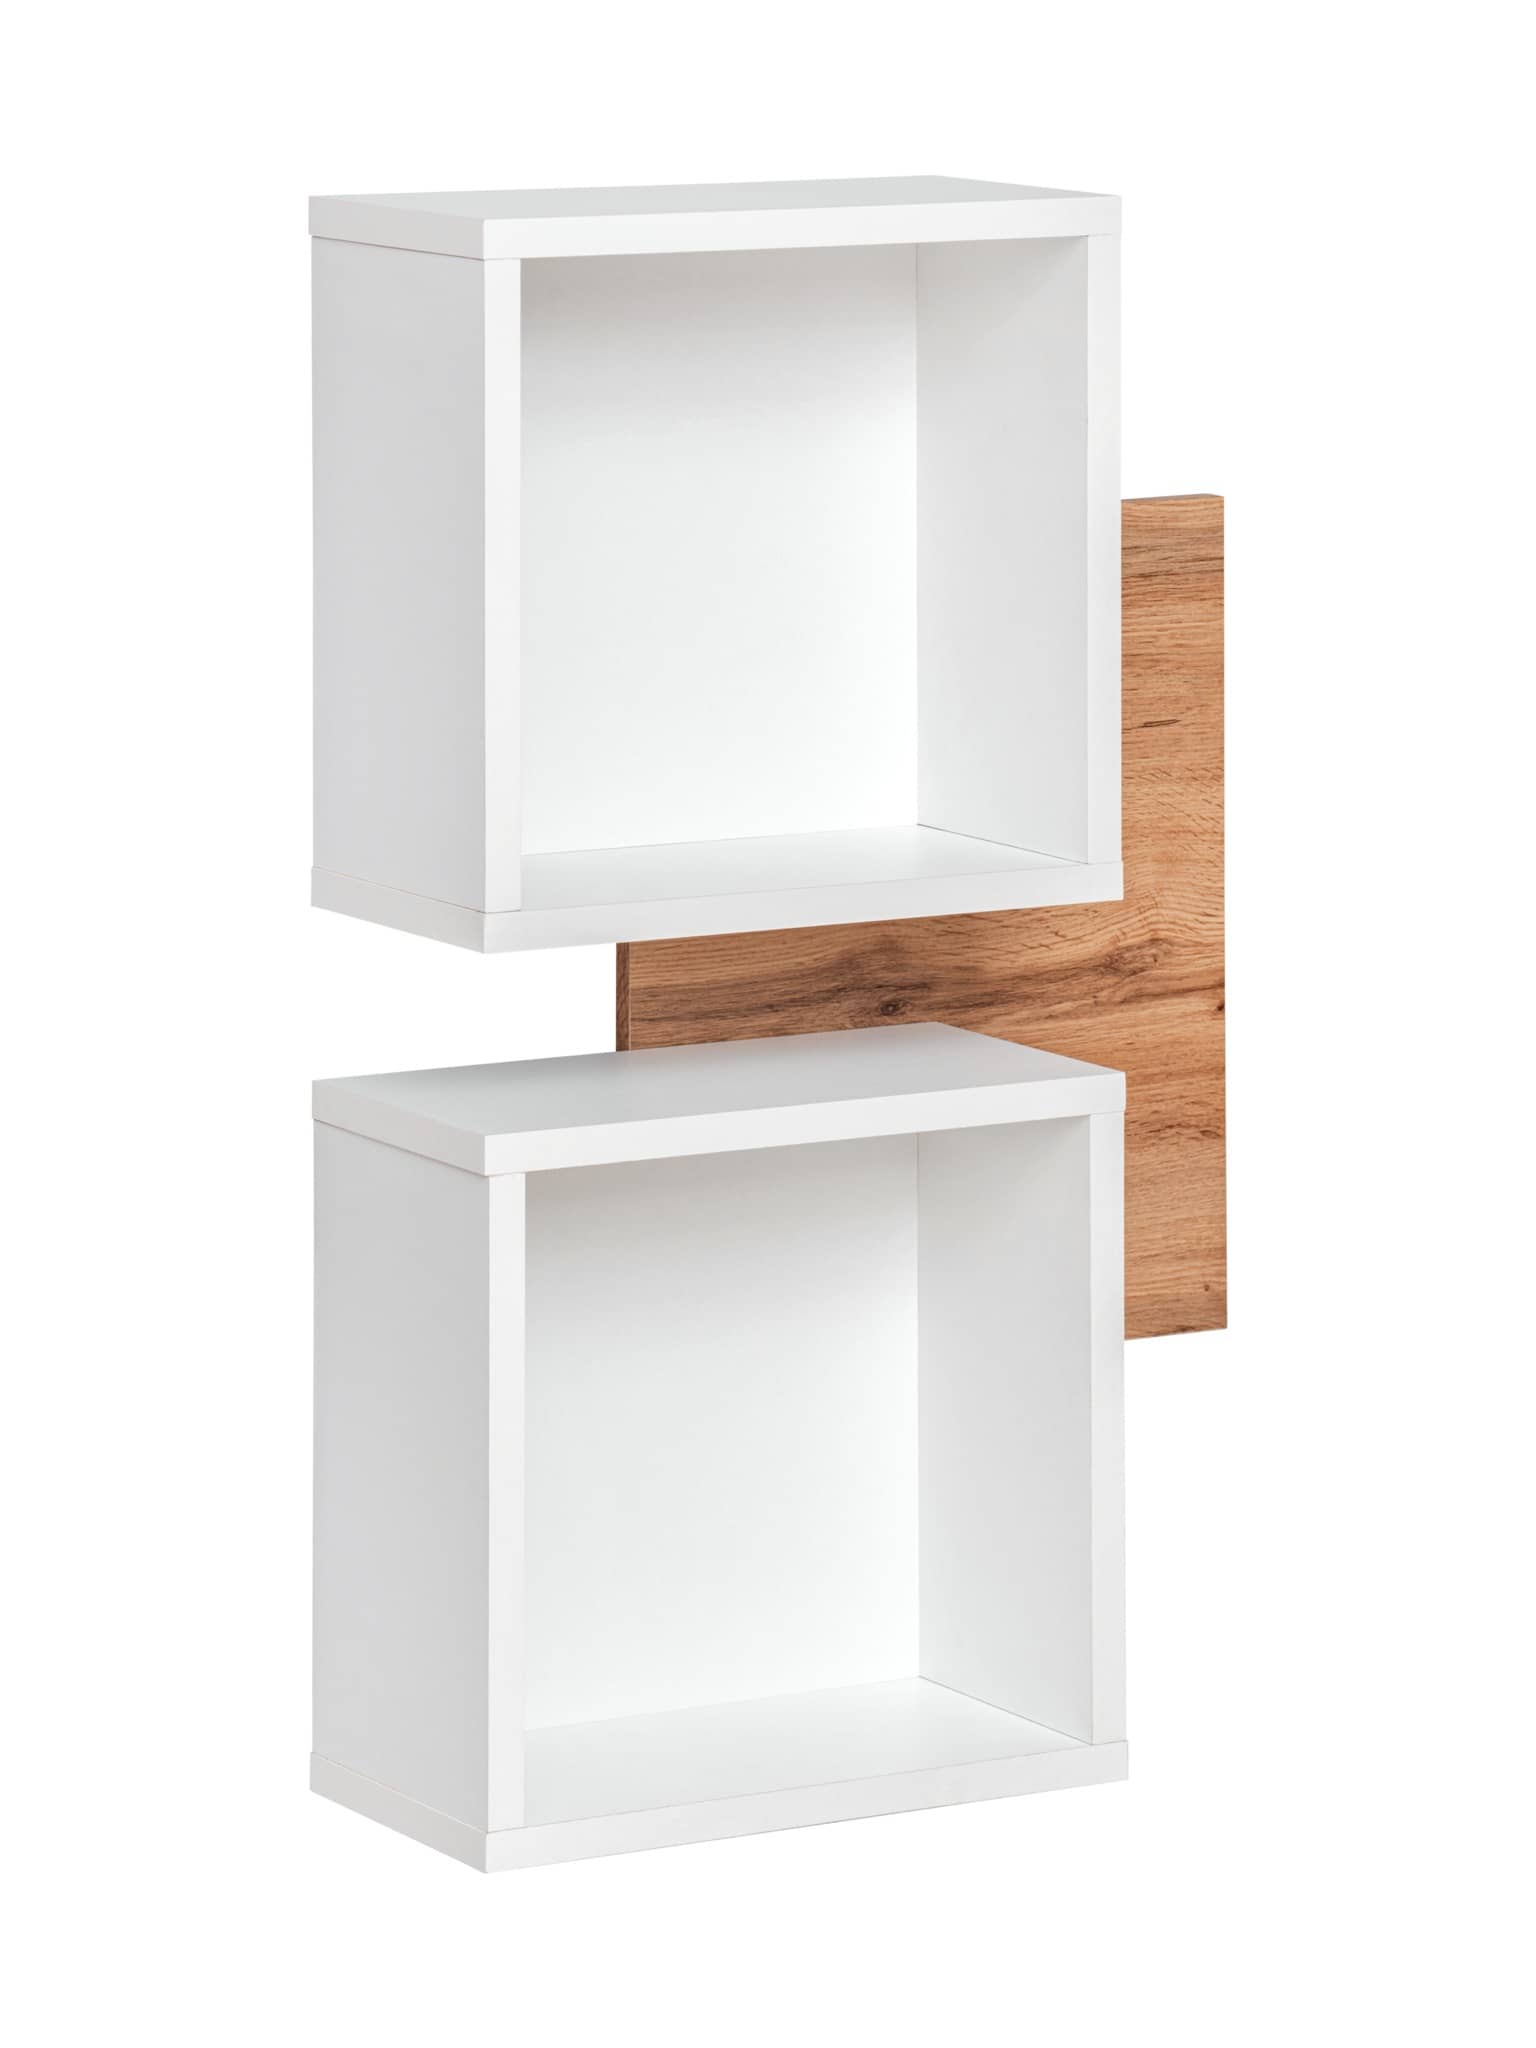 View Easy EY04 Wall Shelves information